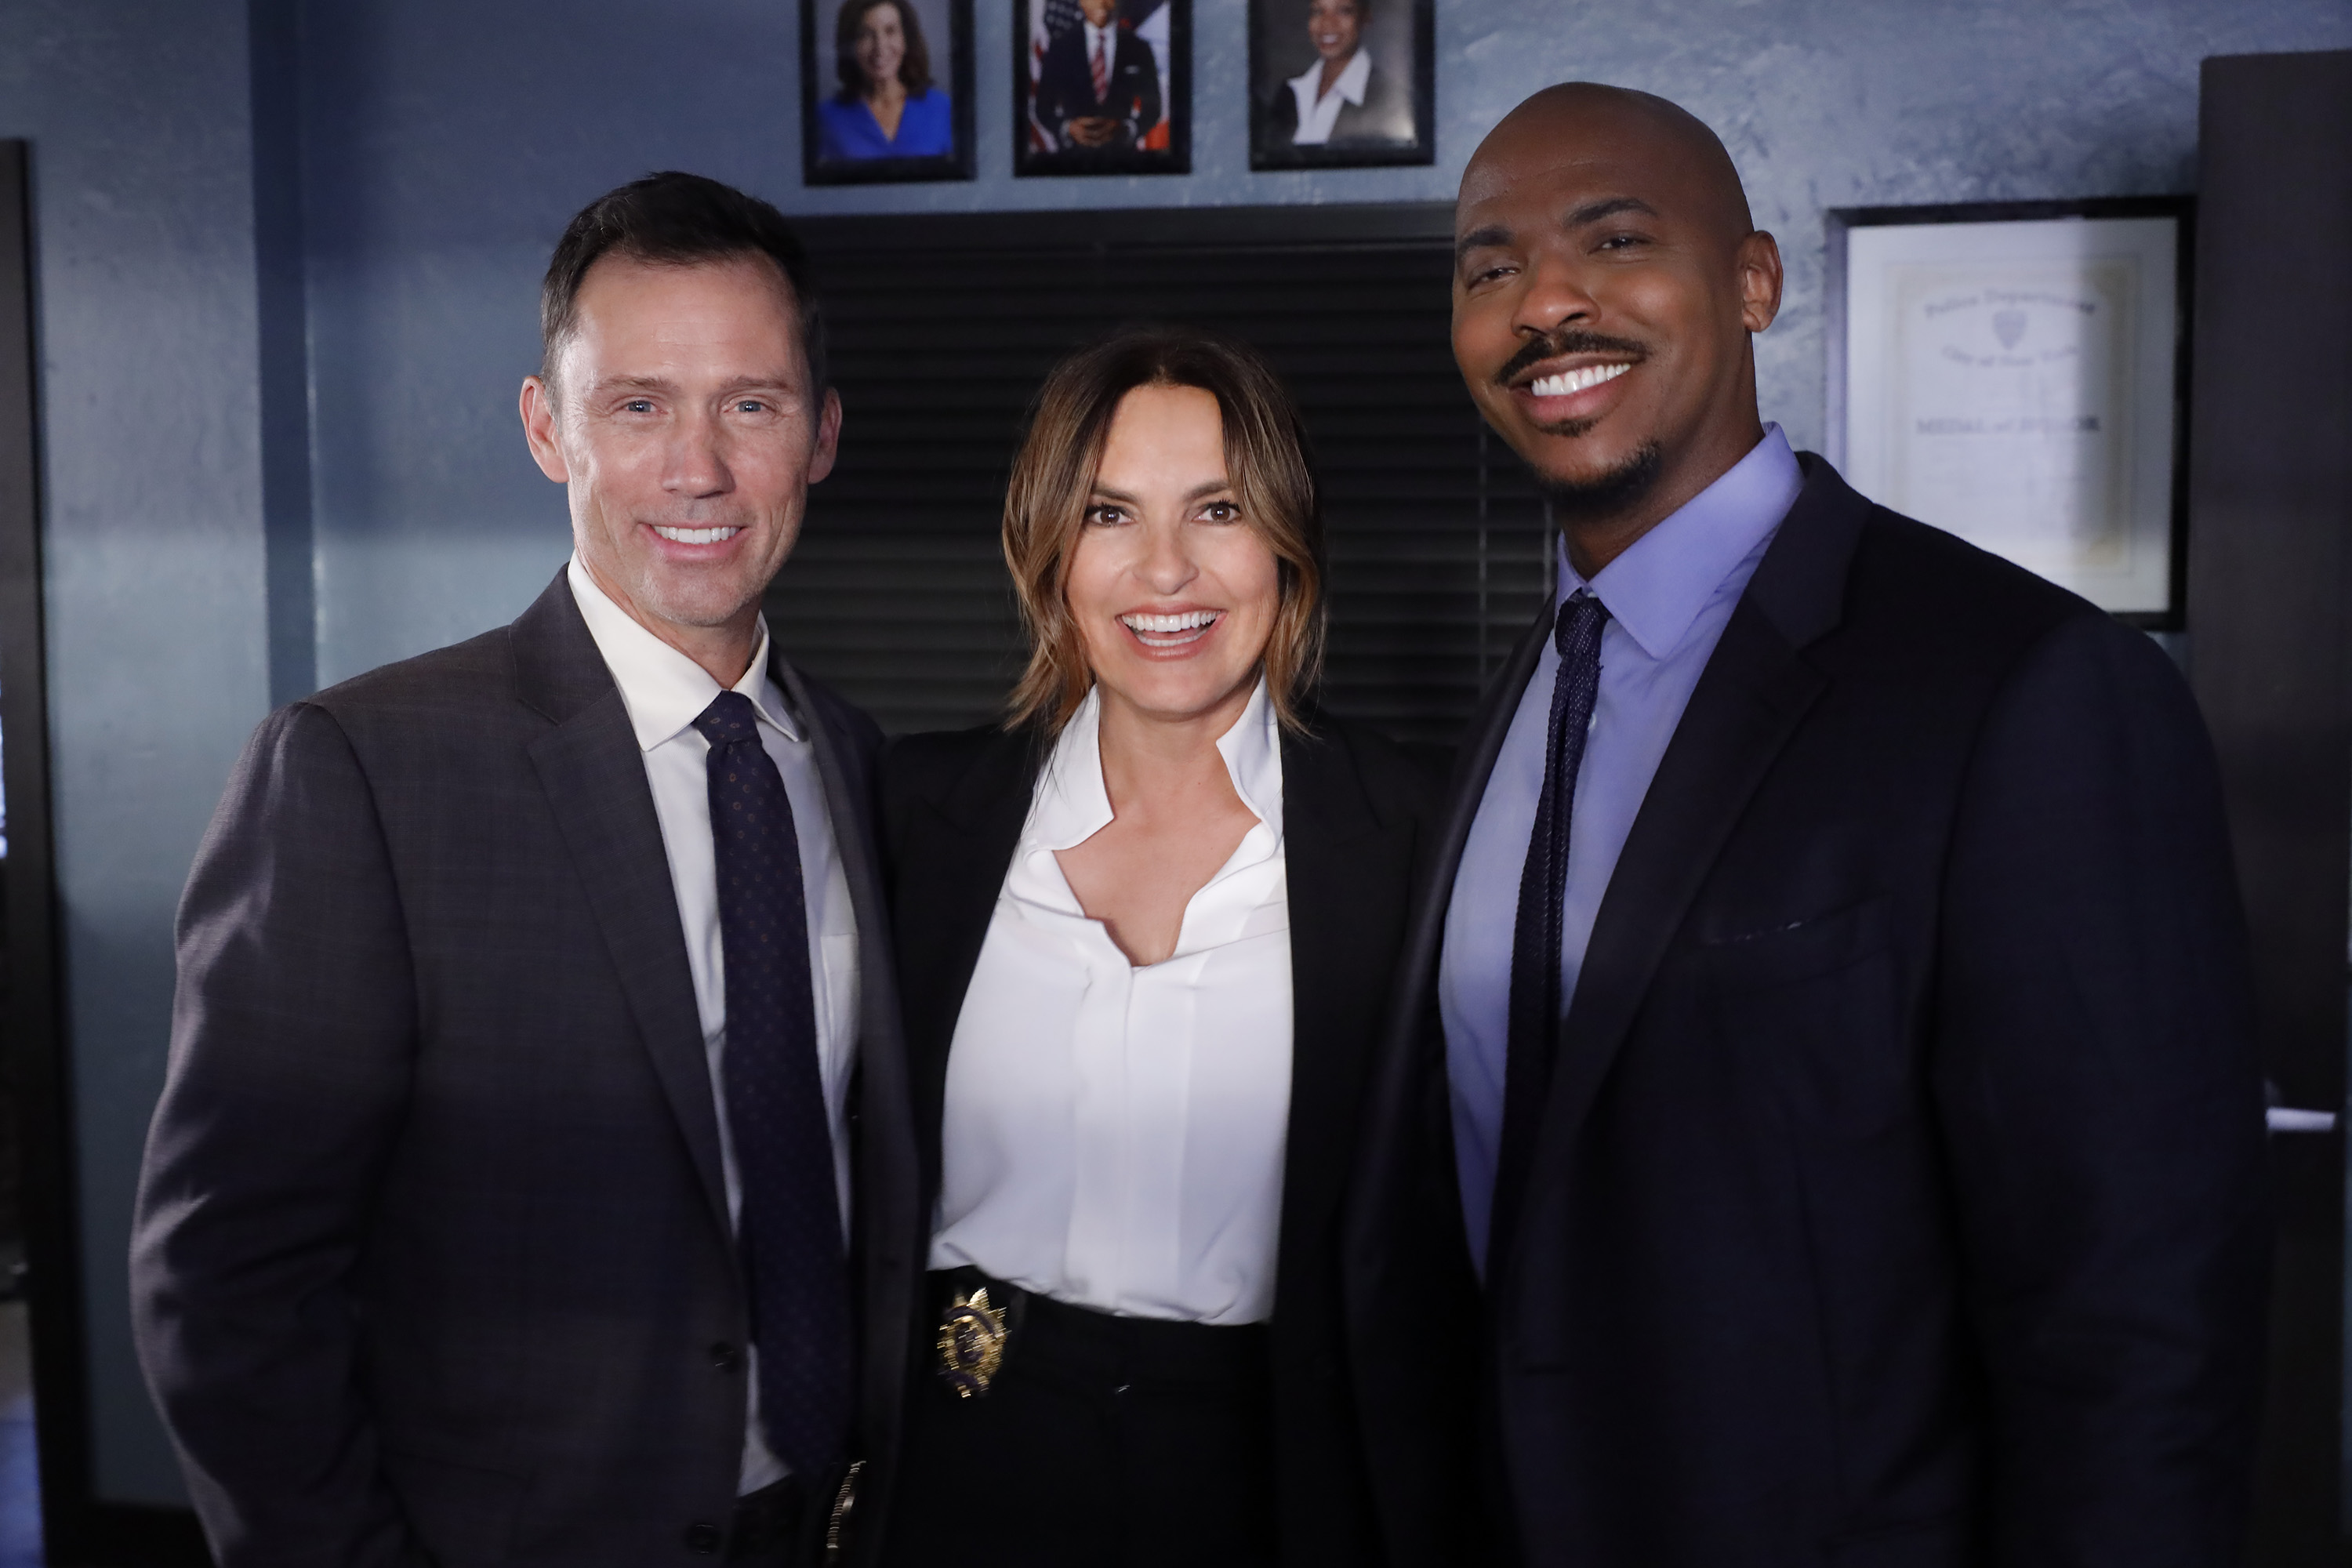 LAW & ORDER PREMIERE EVENT -- "Gimme Shelter" -- Pictured: (l-r) Jeffrey Donovan as Detective Frank Cosgrove, Mariska Hargitay as Captain Olivia Benson, Mehcad Brooks as Detective Jalen Shaw -- (Photo by: Will Hart/NBC)